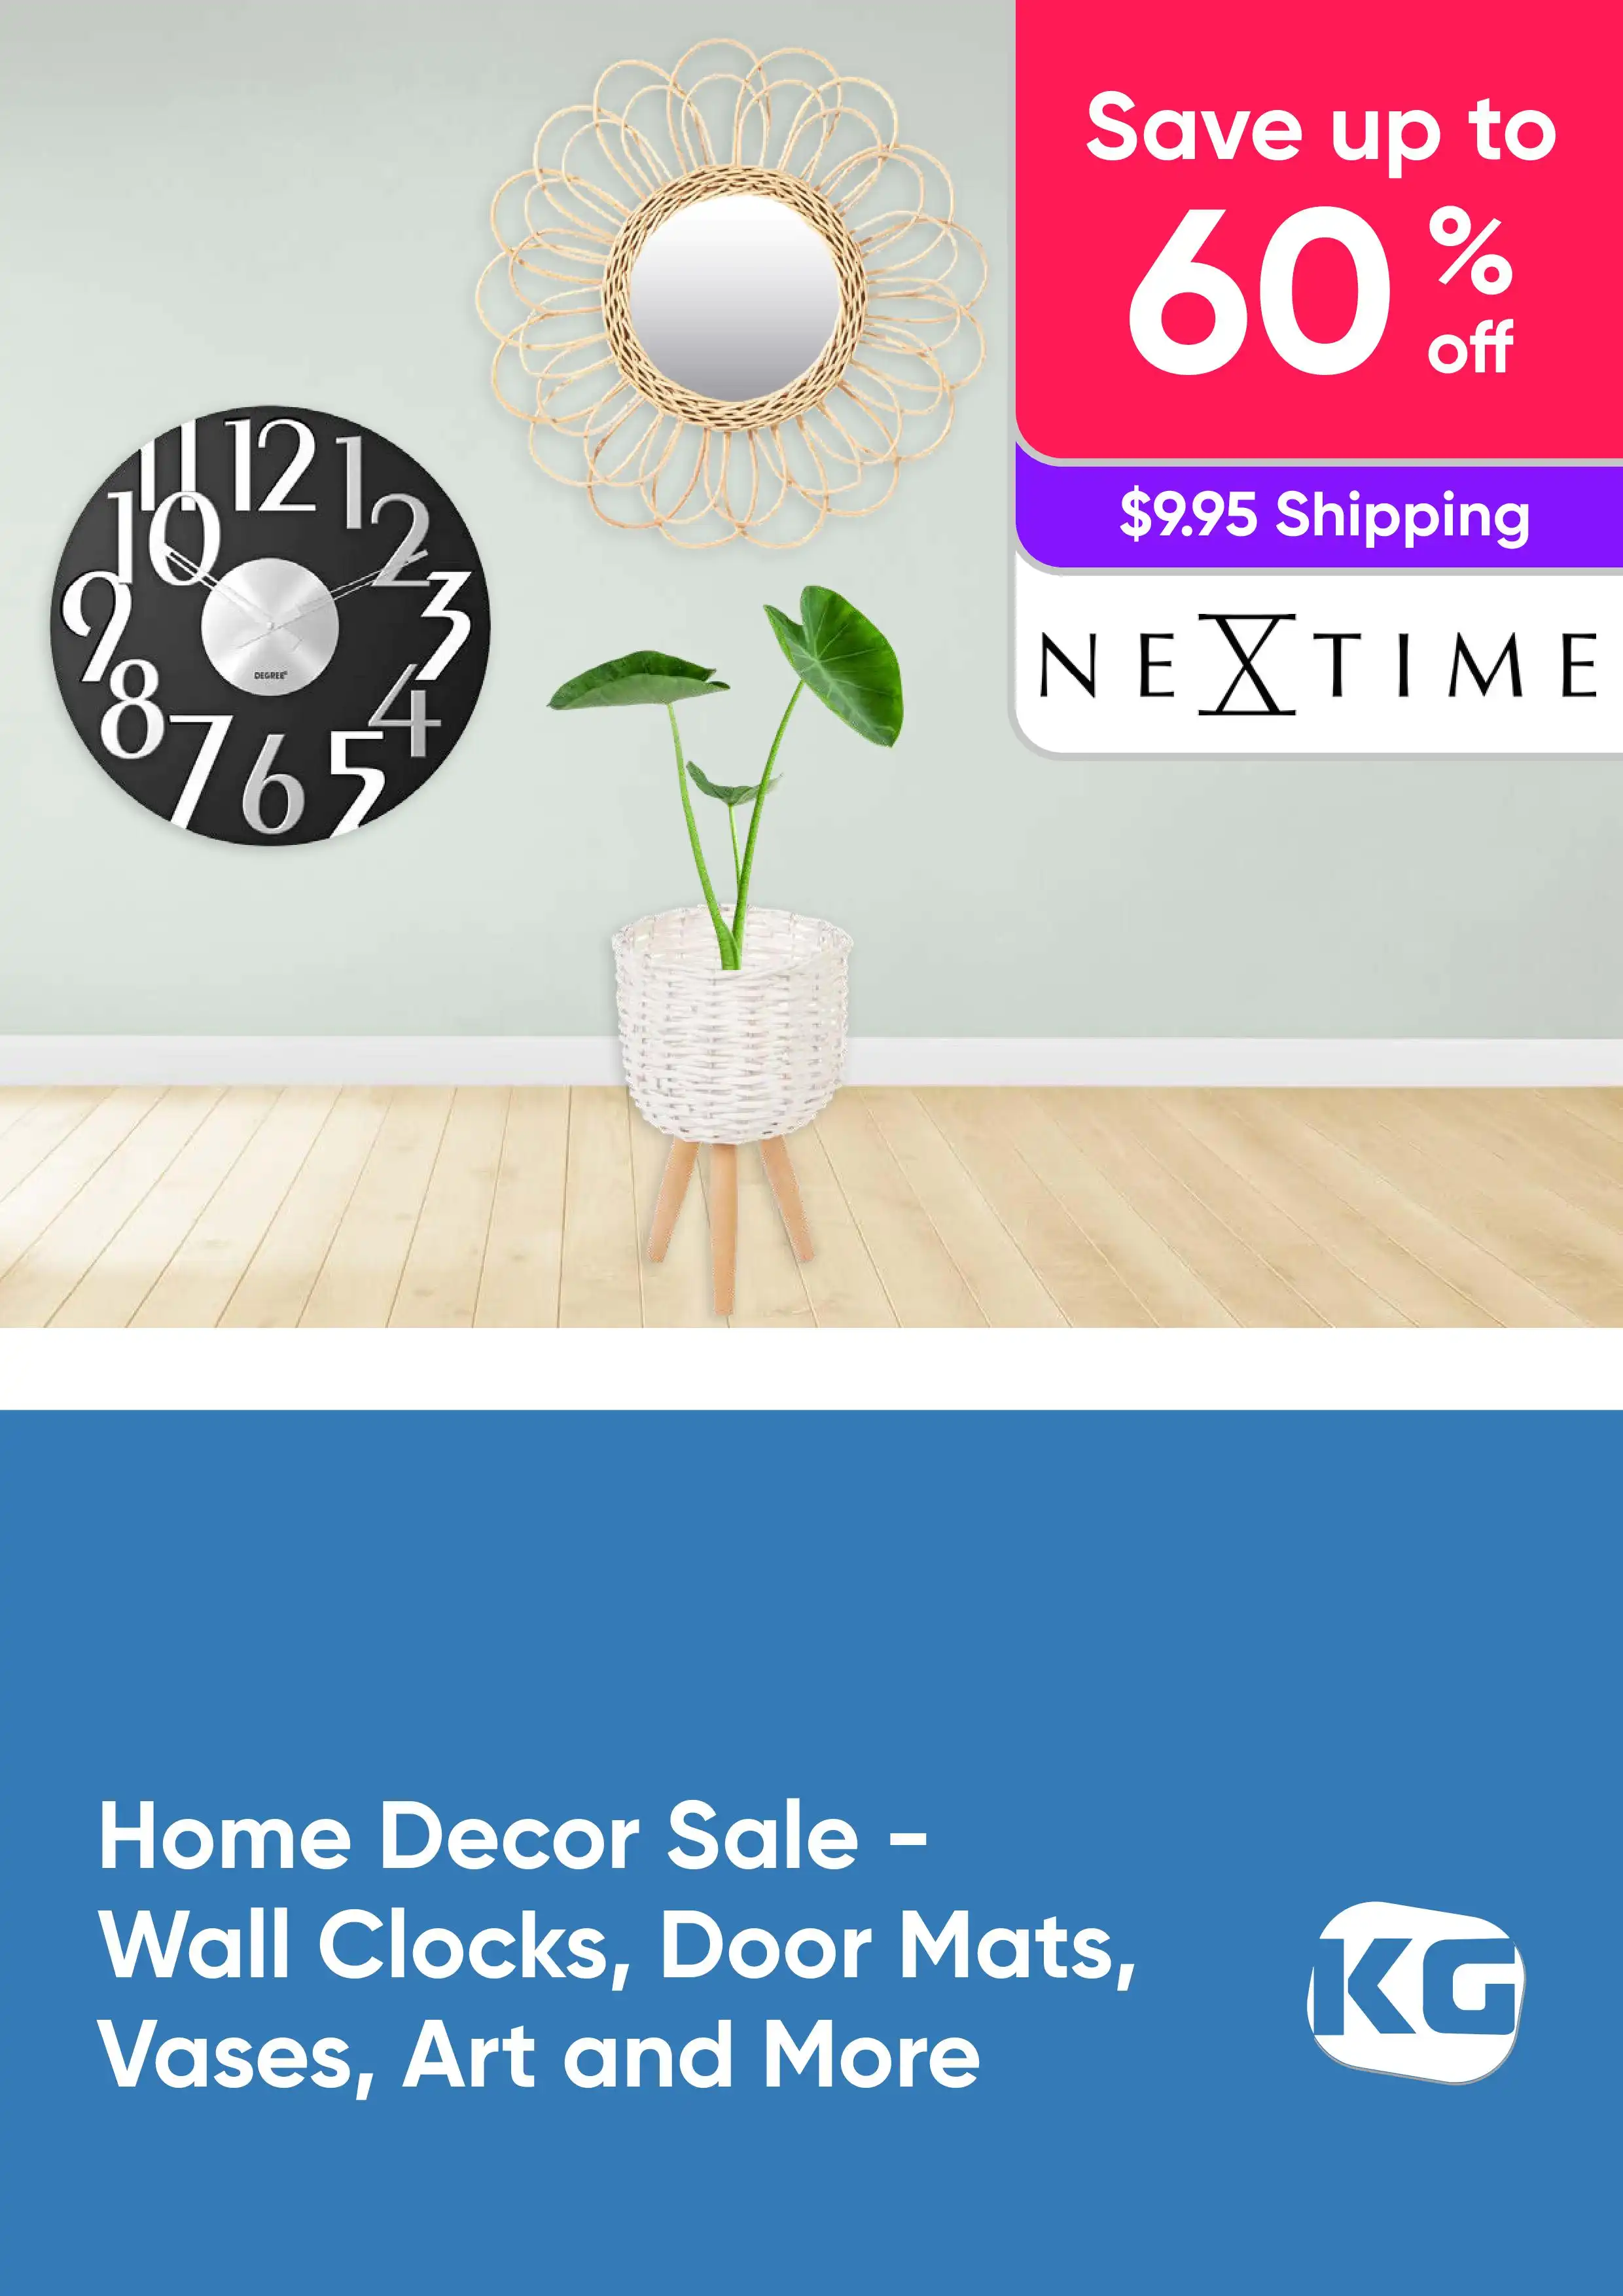 Home Decor Sale - Wall Clocks, Door Mats, Vases, Art and More up to 60% Off